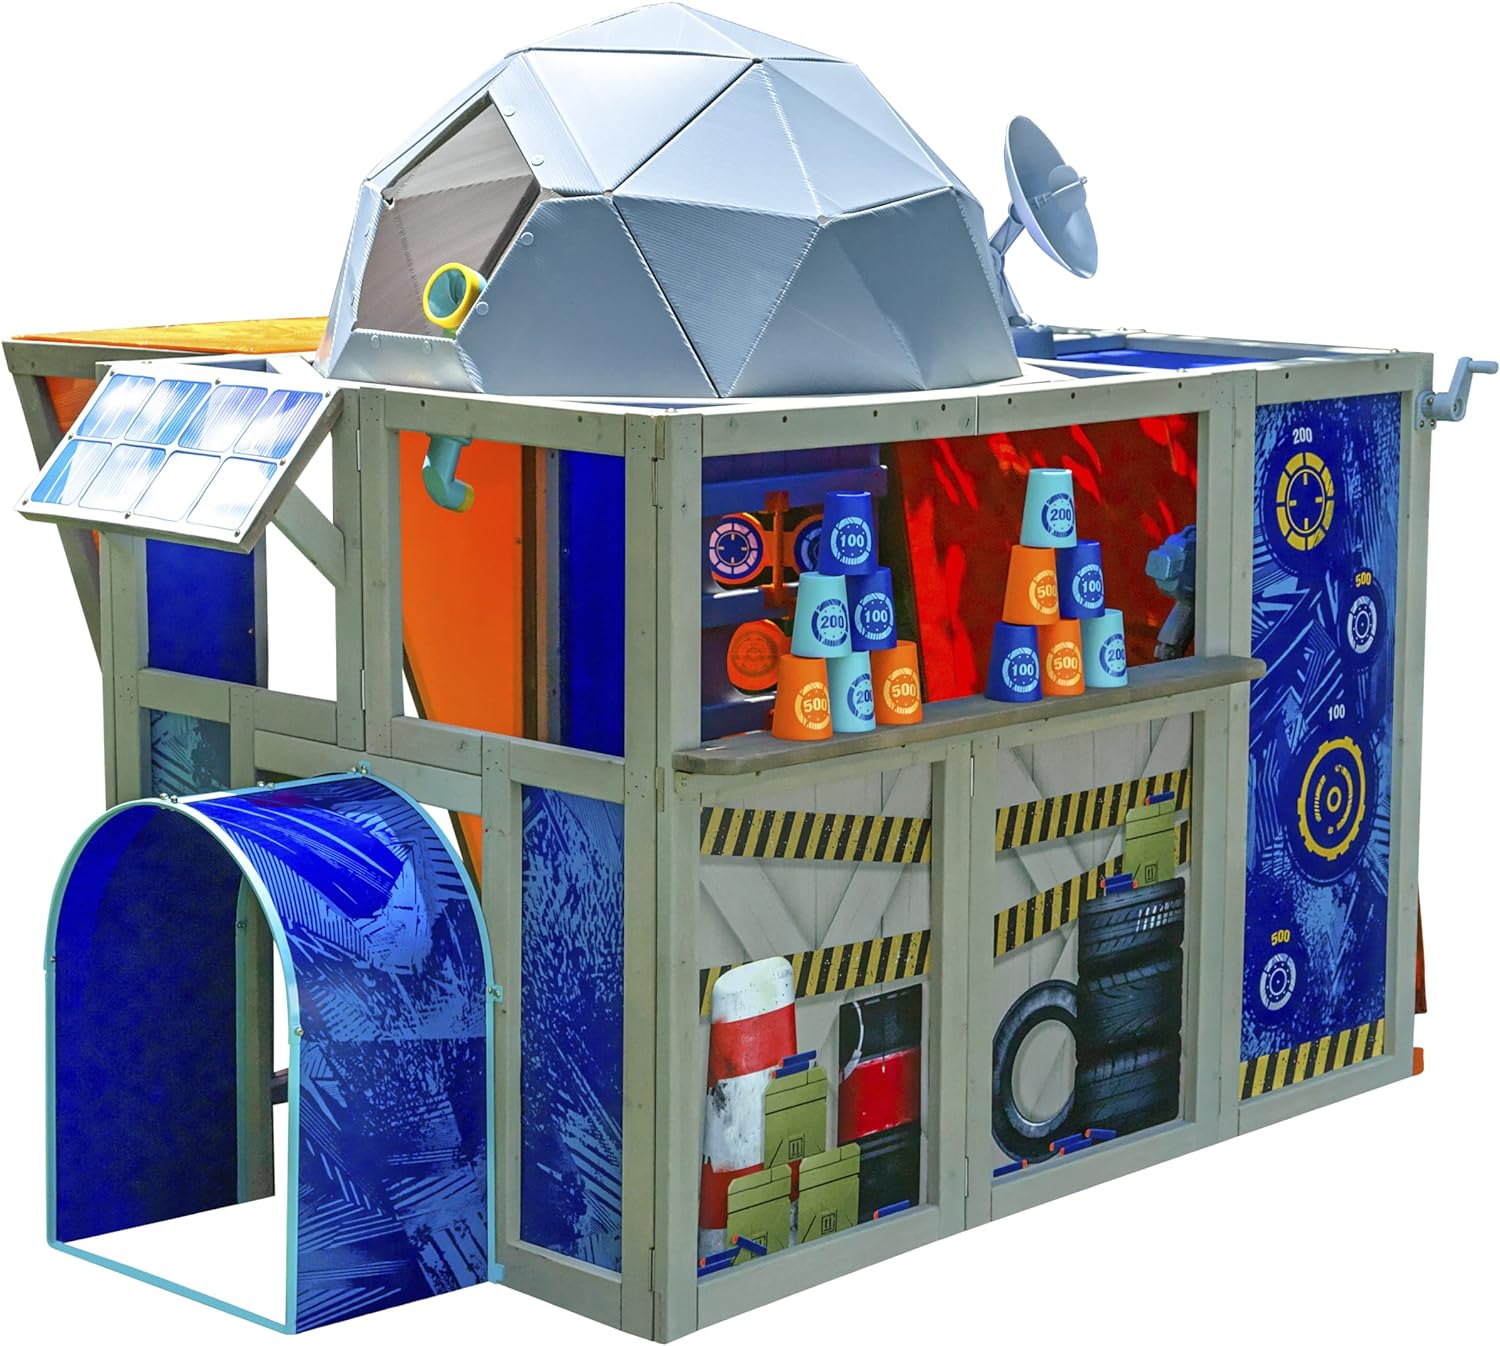 Nerf Geo Strike Headquarters Wooden Outdoor Fort with Targets, Satellite, Periscope & Storage